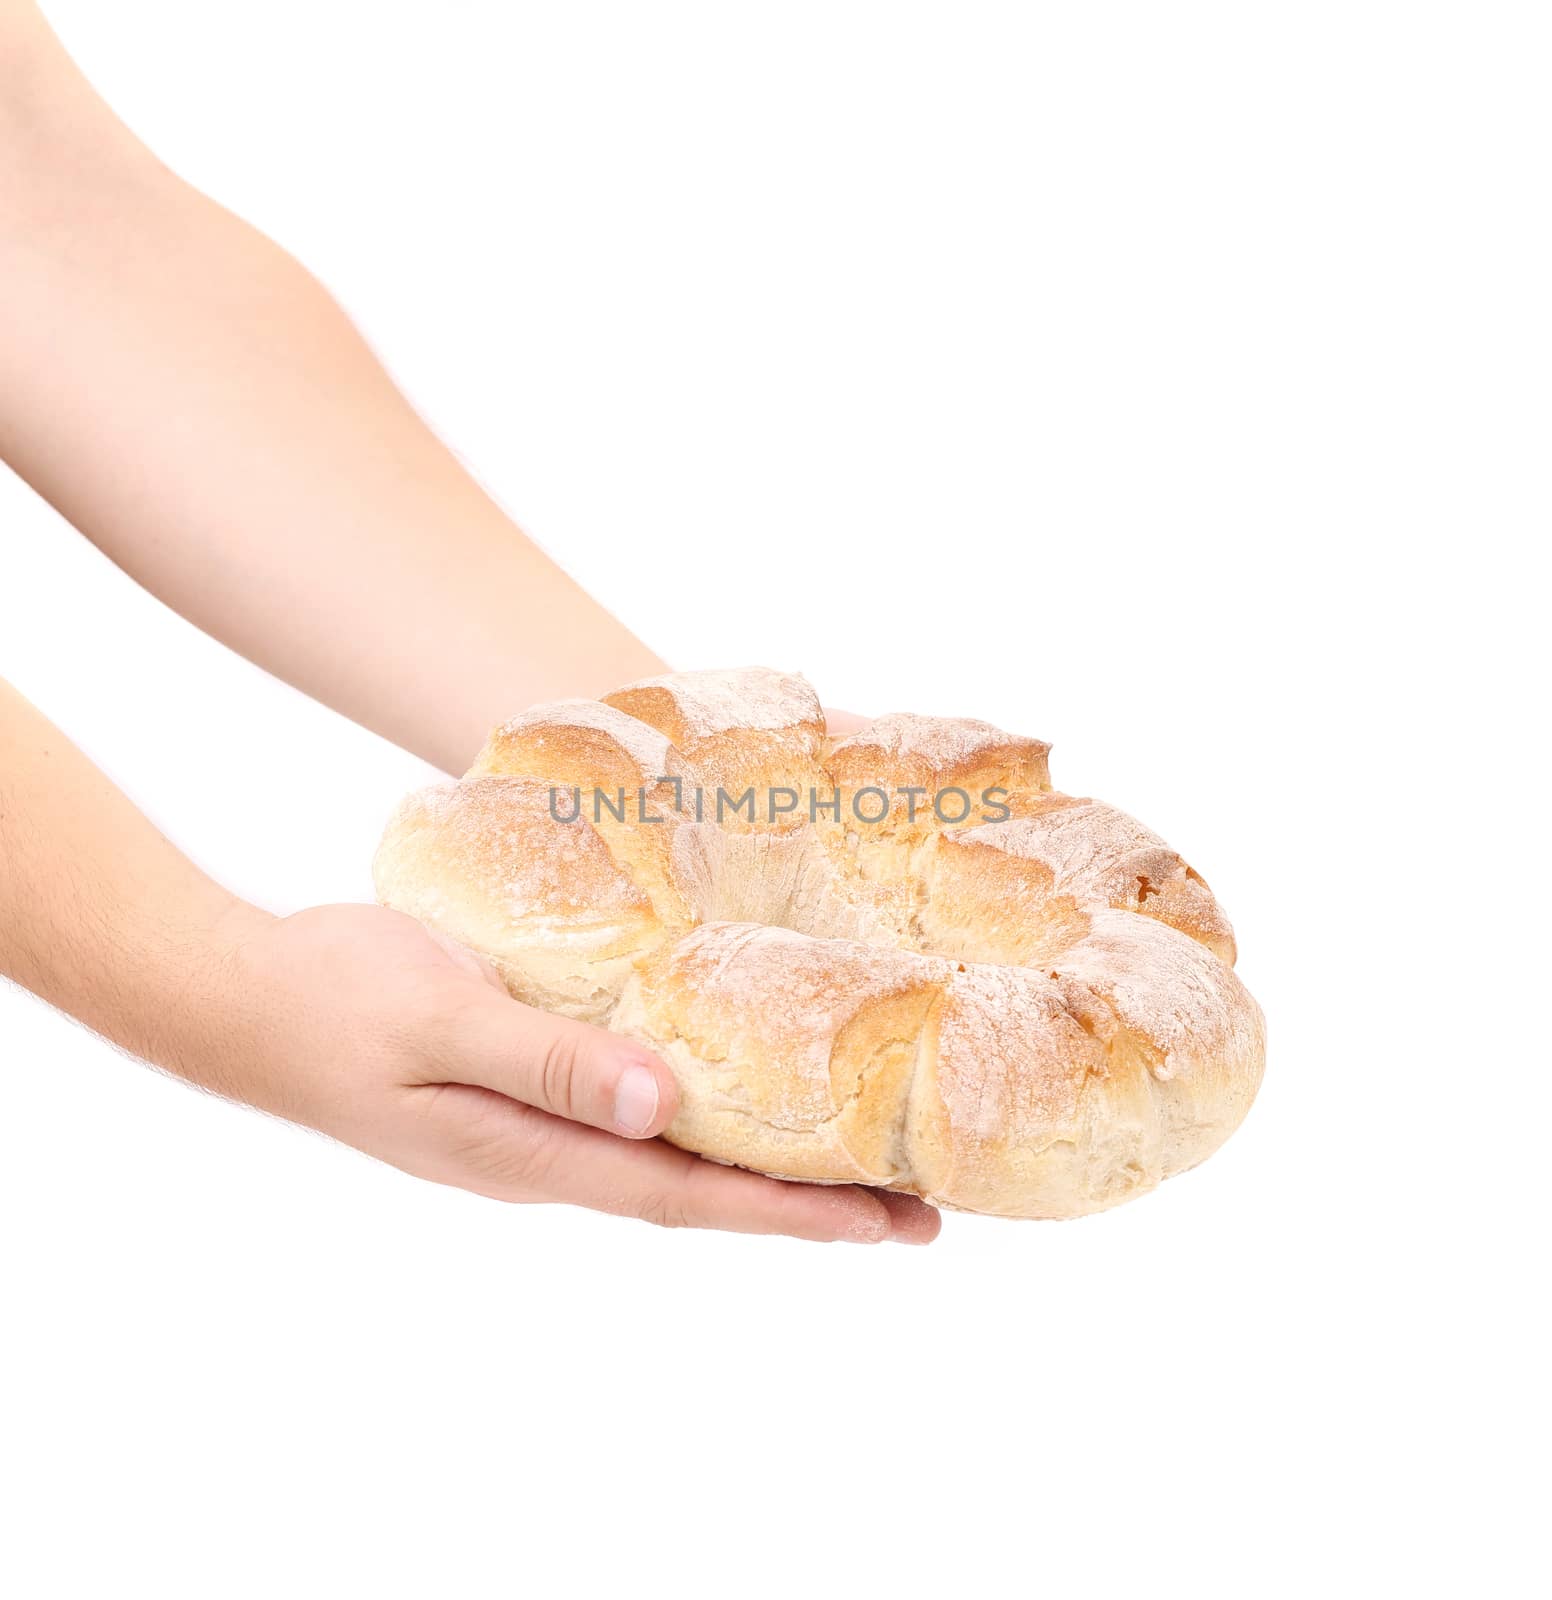 Hands holding round bread. Isolated on a white background.